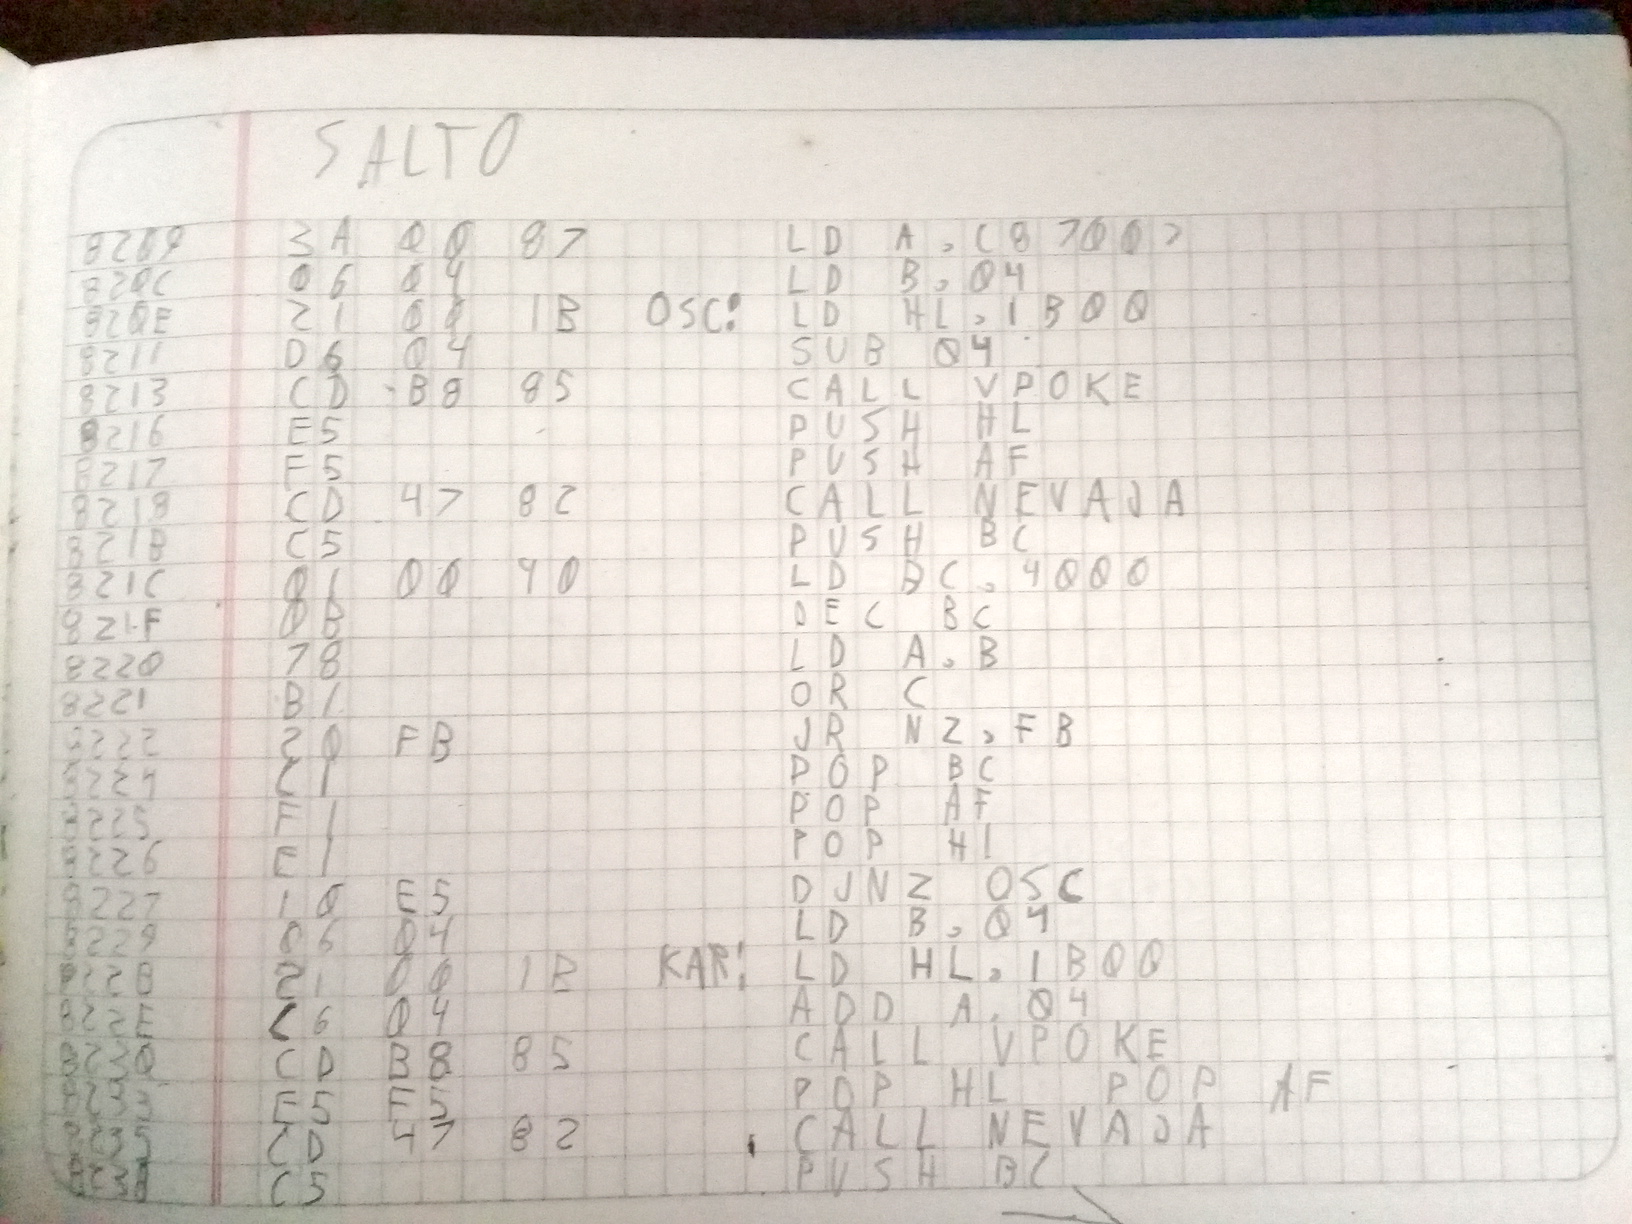 Page 12 of my Z80 game